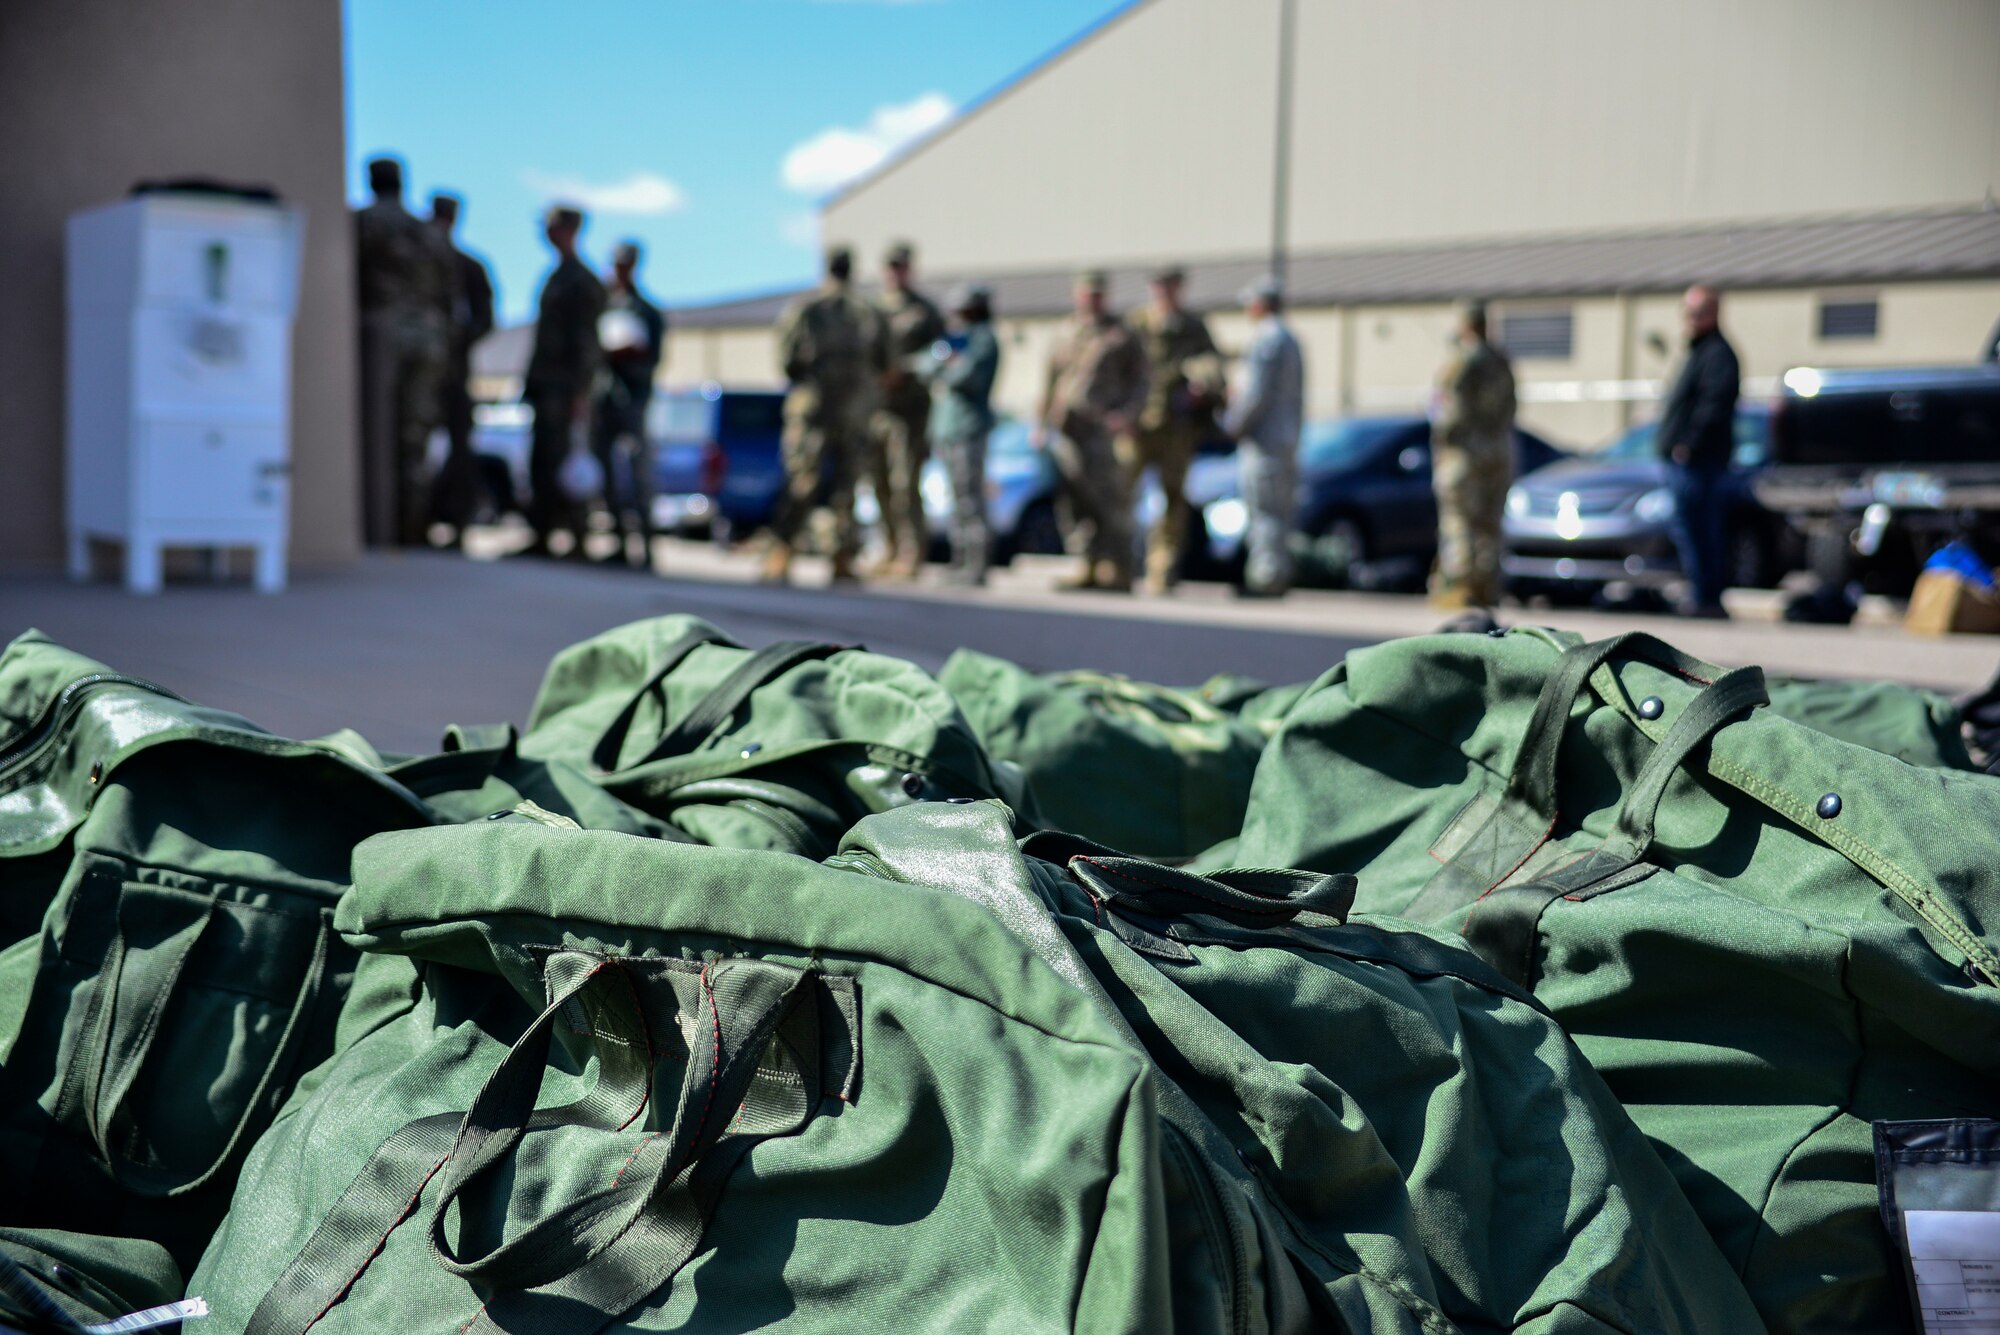 Team Kirtland members taking part in exercise Global Thunder 20 wait to be moved to their secondary location at Kirtland Air Force Base, N.M., Oct. 24, 2019. Global Thunder is a large-scale exercise that required an extensive amount of planning and coordinating to unit training for assigned units and allies. (U.S. Air Force photo by Staff Sgt. Kimberly Nagle)